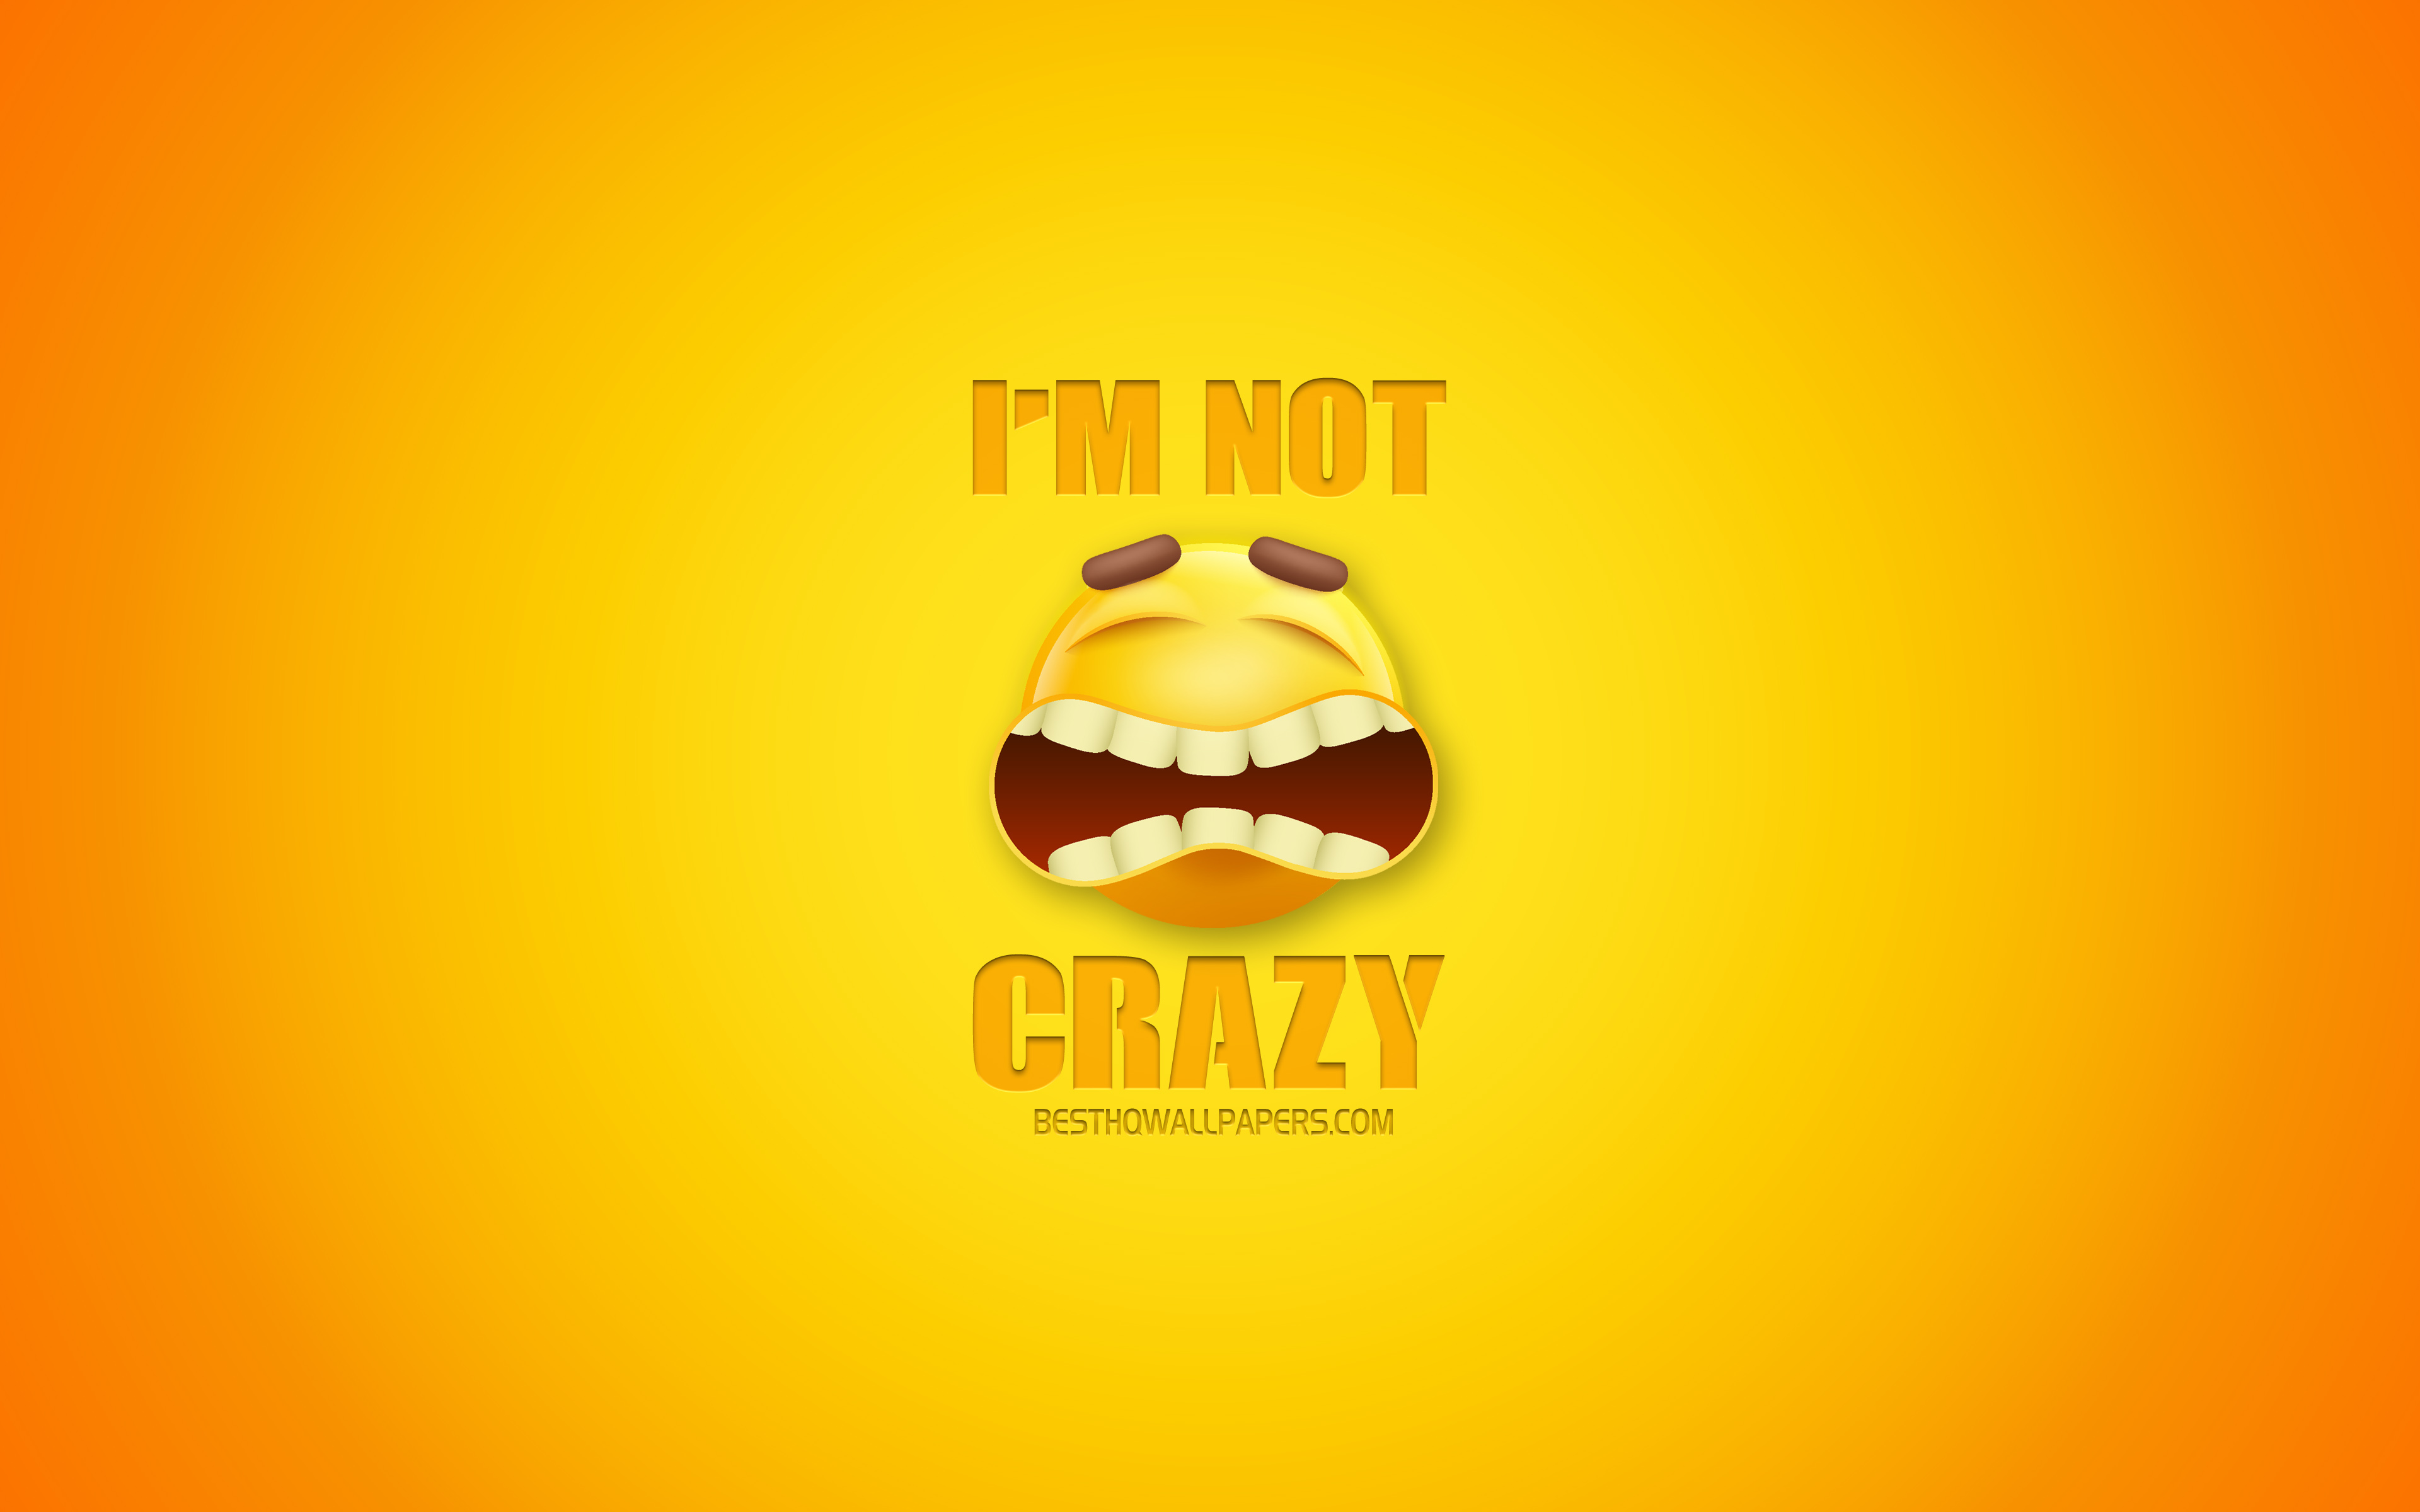 Download wallpapers i am not crazy funny art crazy concept yellow background creative art for desktop with resolution x high quality hd pictures wallpapers